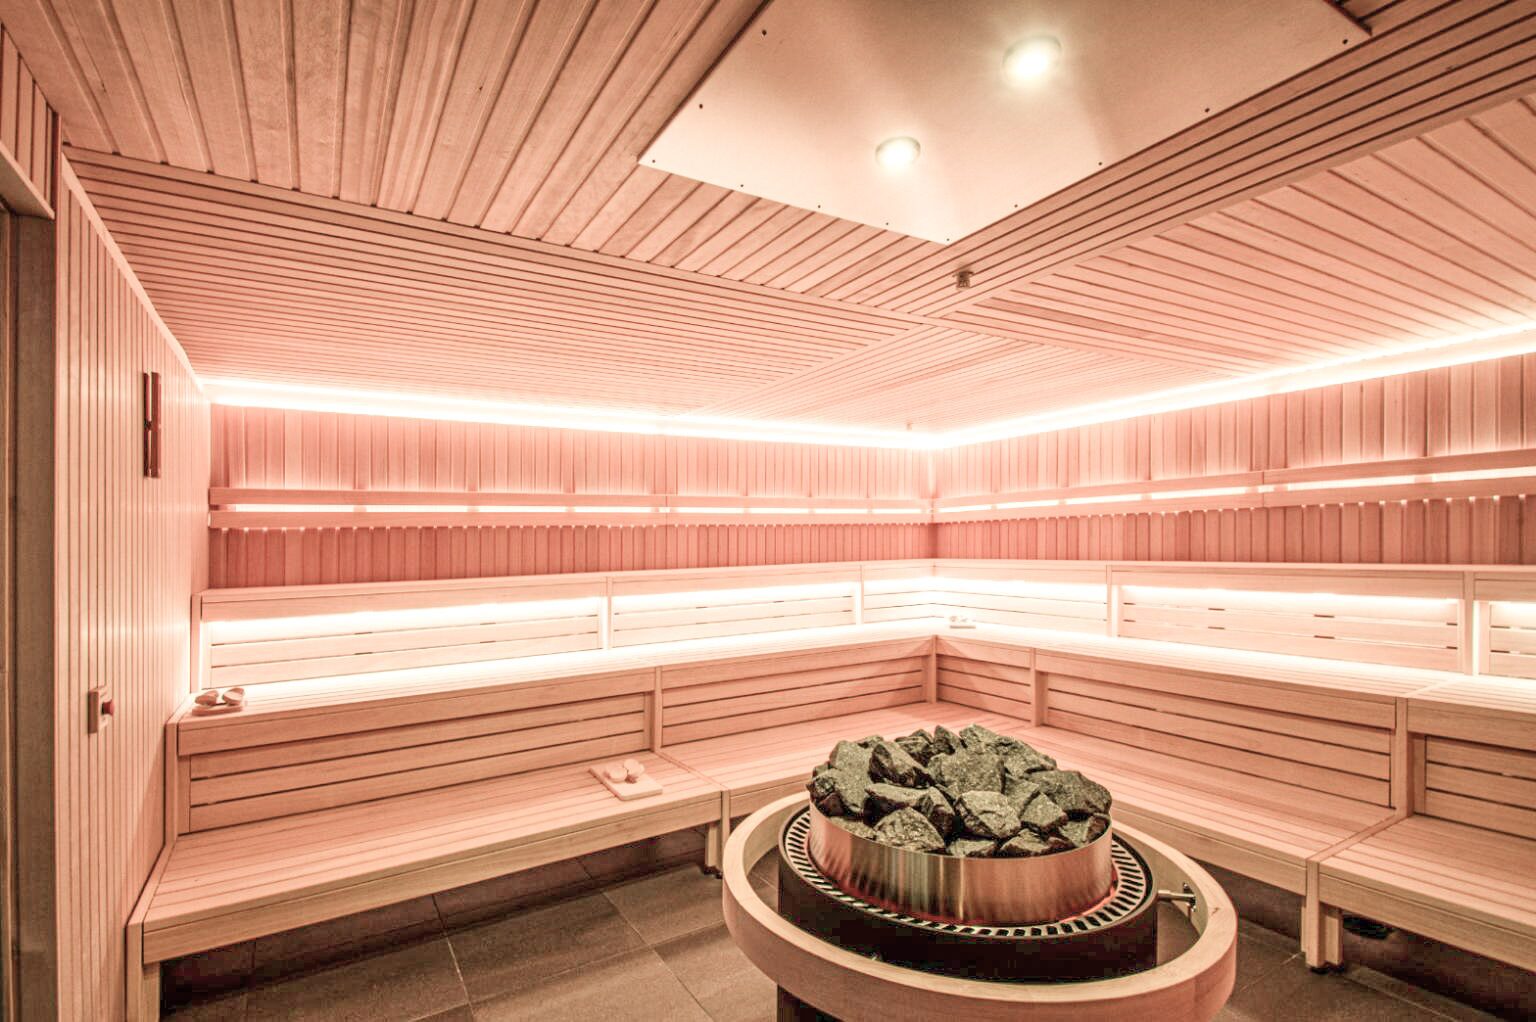 RELAX IN ONE OF THE MANY SAUNAS